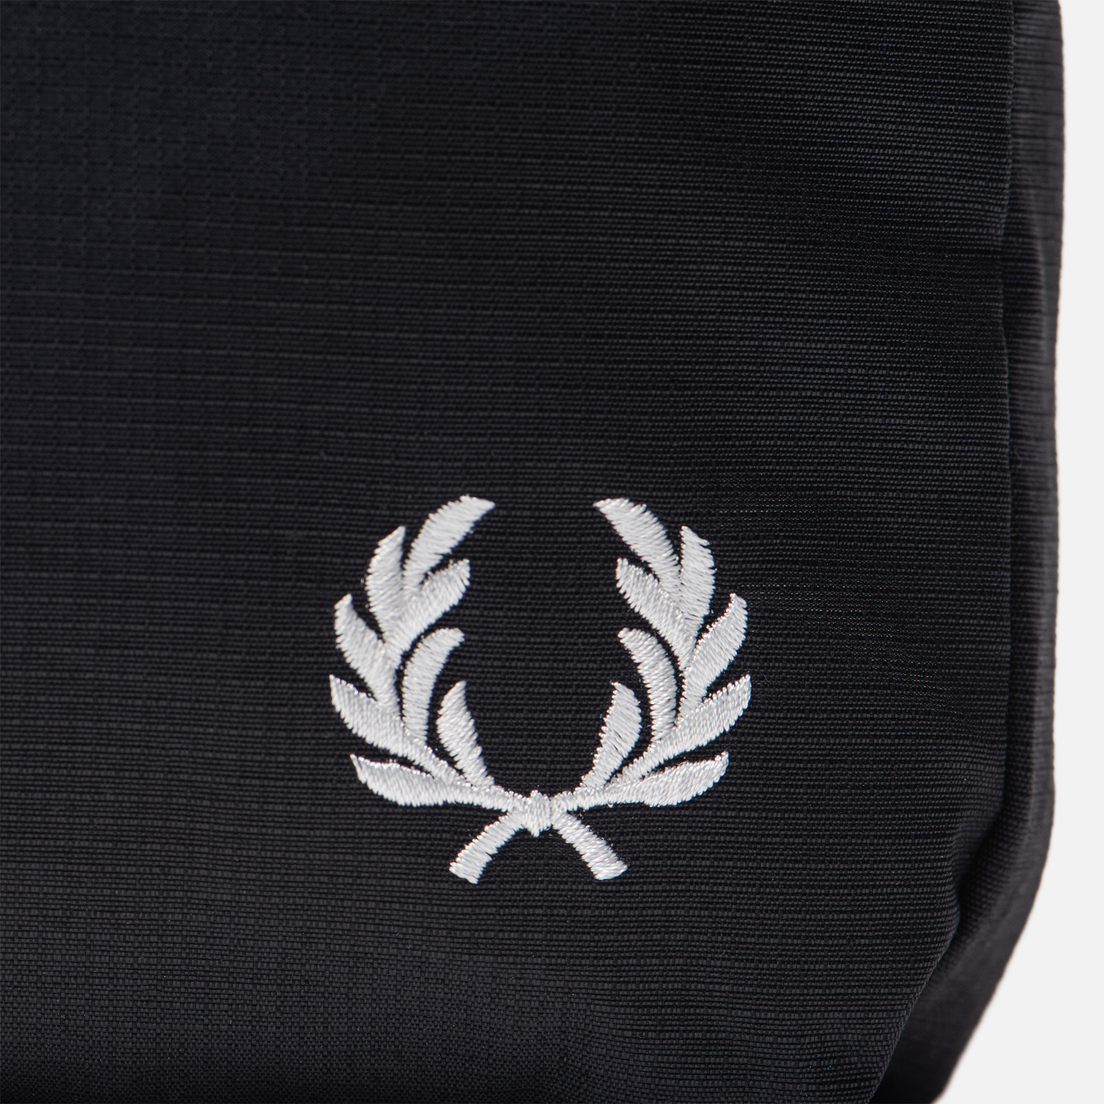 Fred Perry Сумка Side